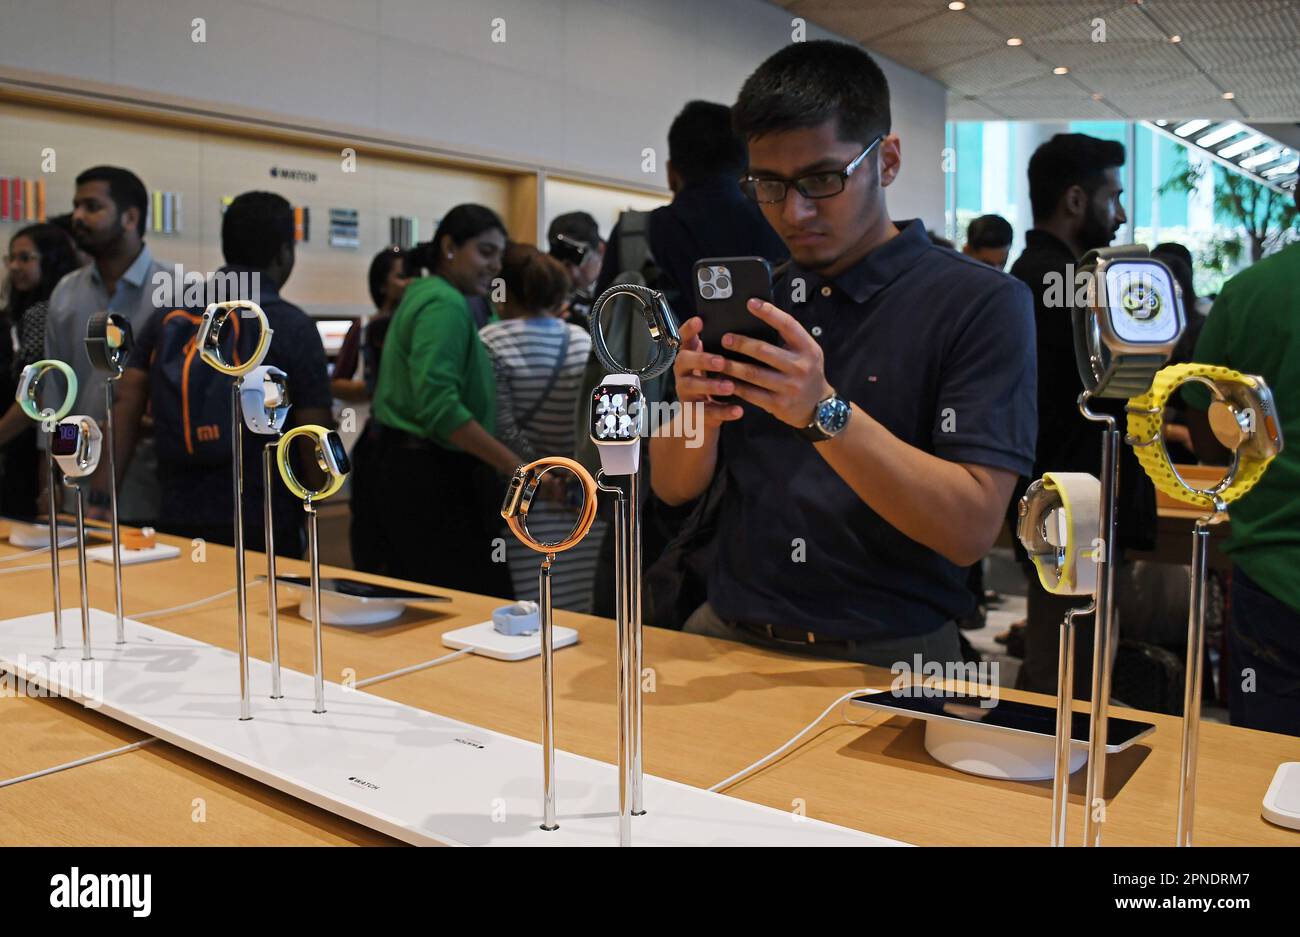 Customers at an Apple Store Looking at a Display Case of Apple Watches  Editorial Photo - Image of modern, global: 237139141